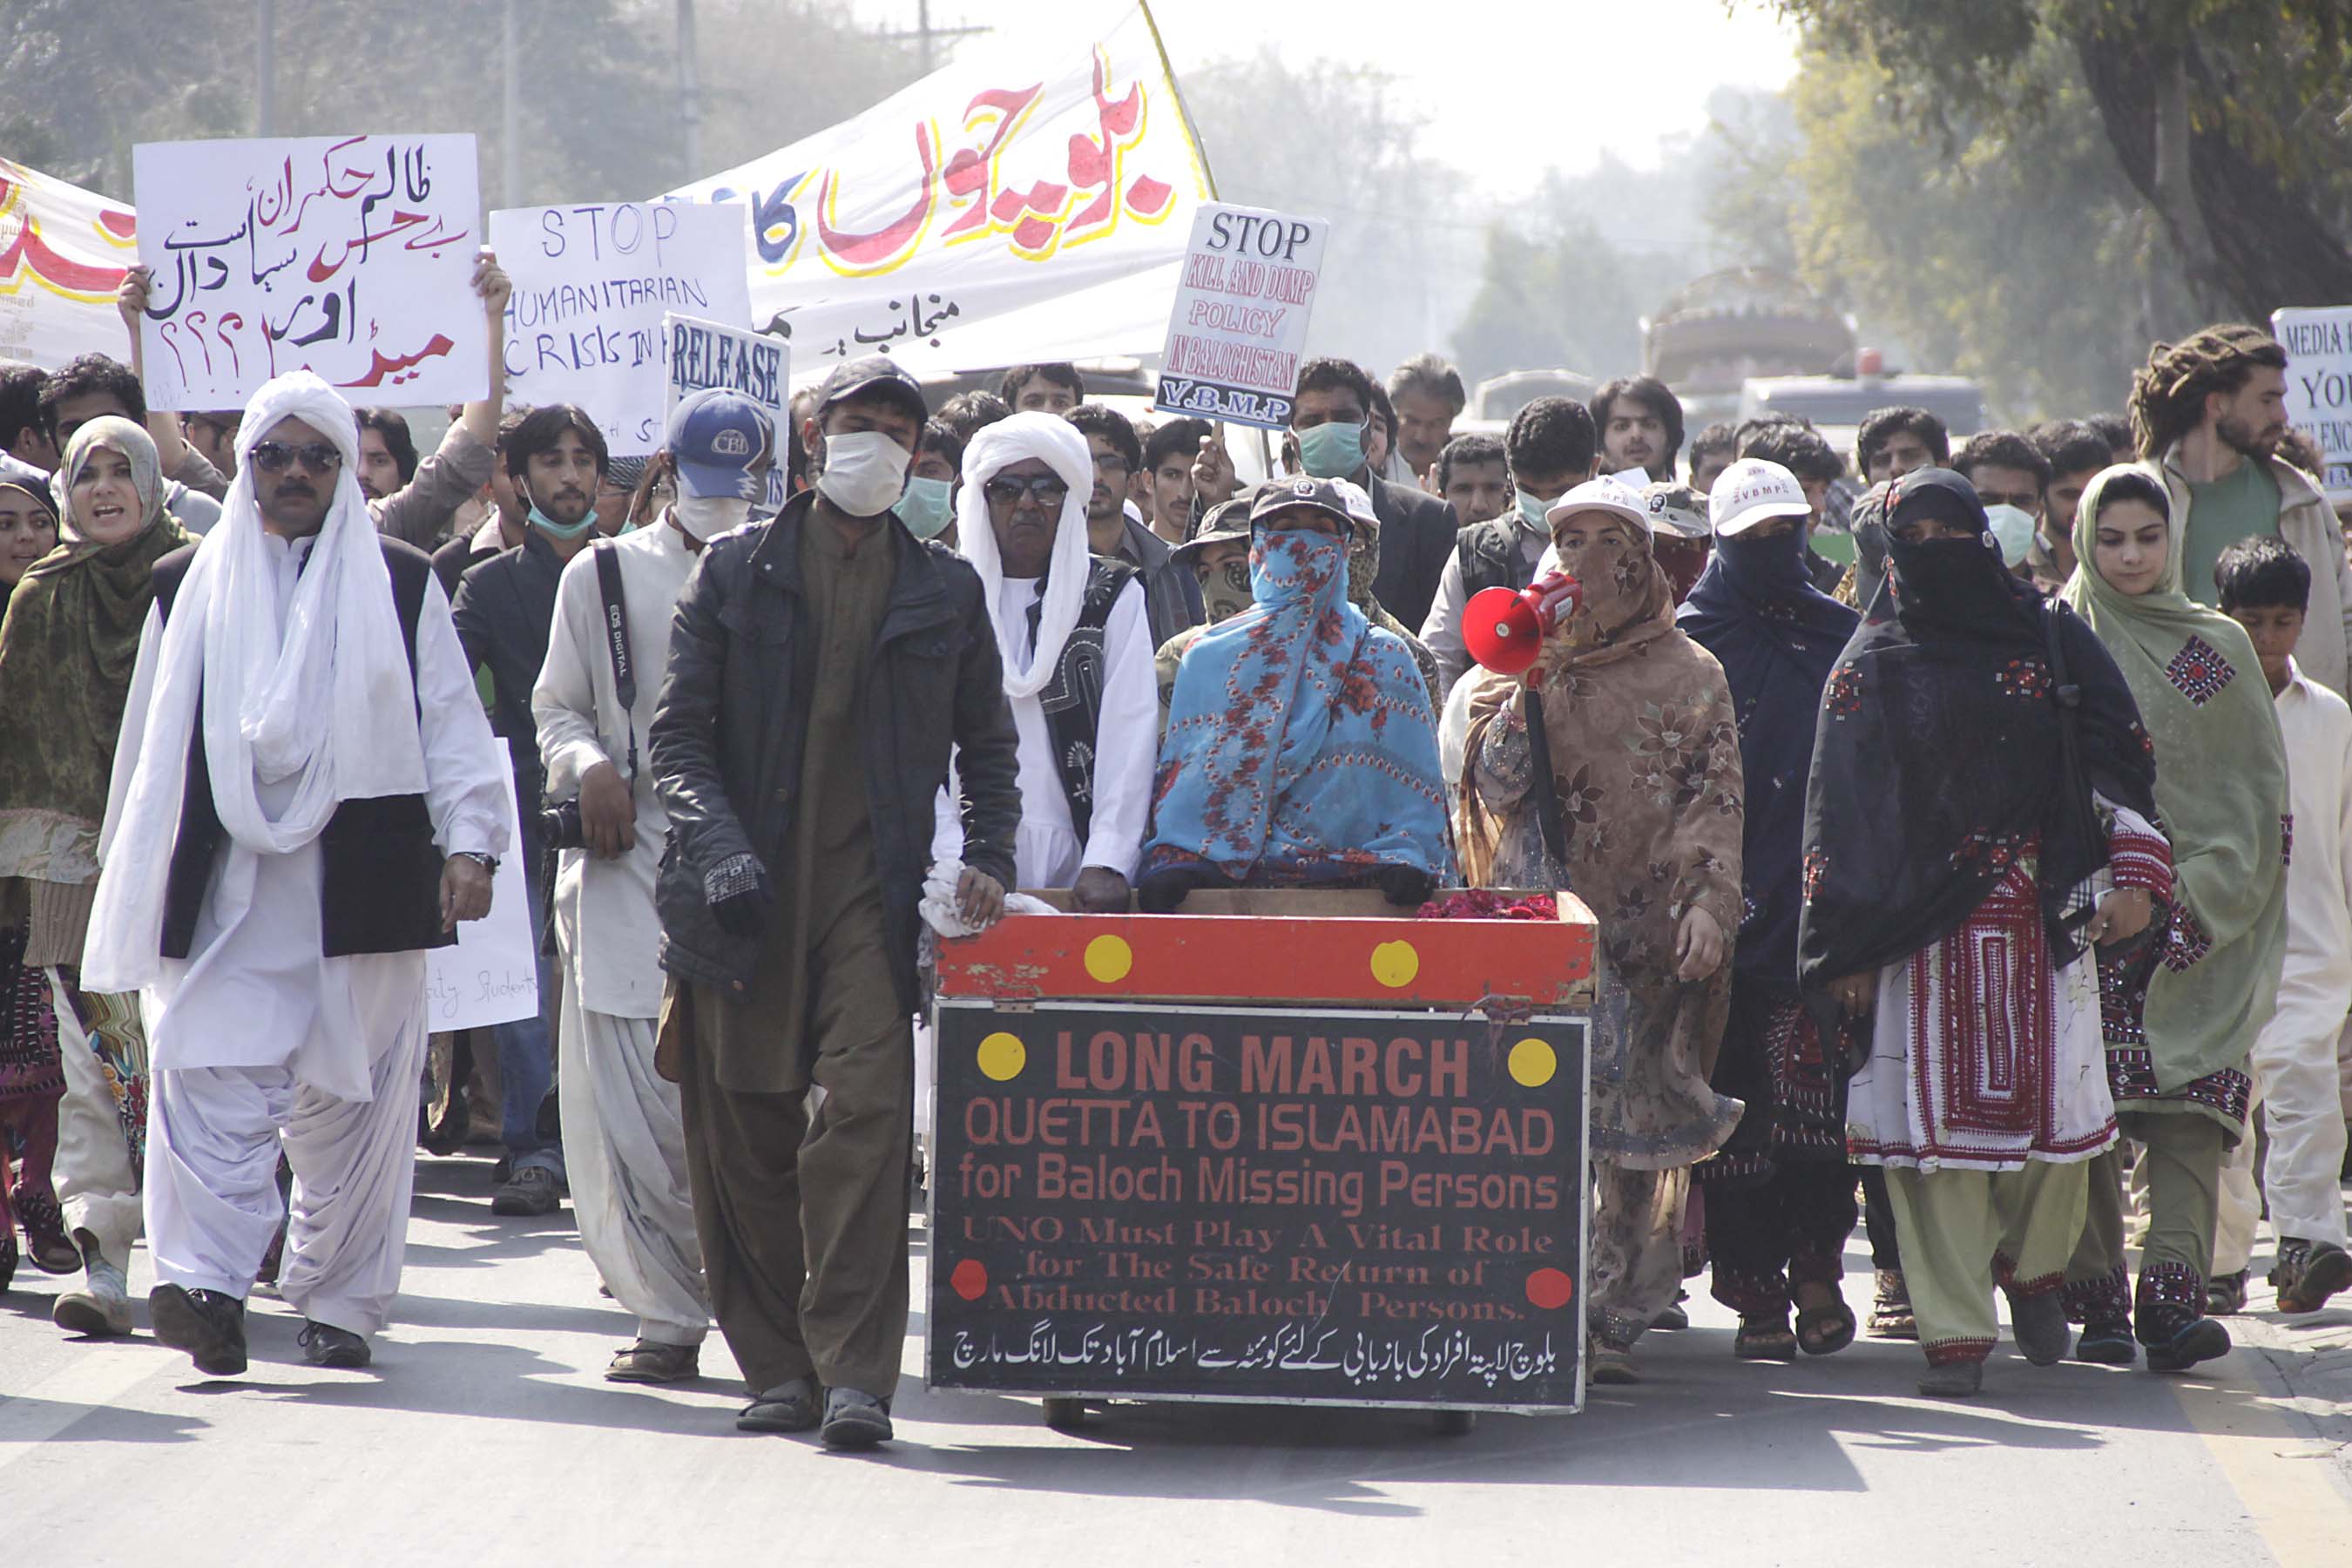 activists marching for the missing baloch persons enter the outskirts of lahore on thursday photo shafiq malik express